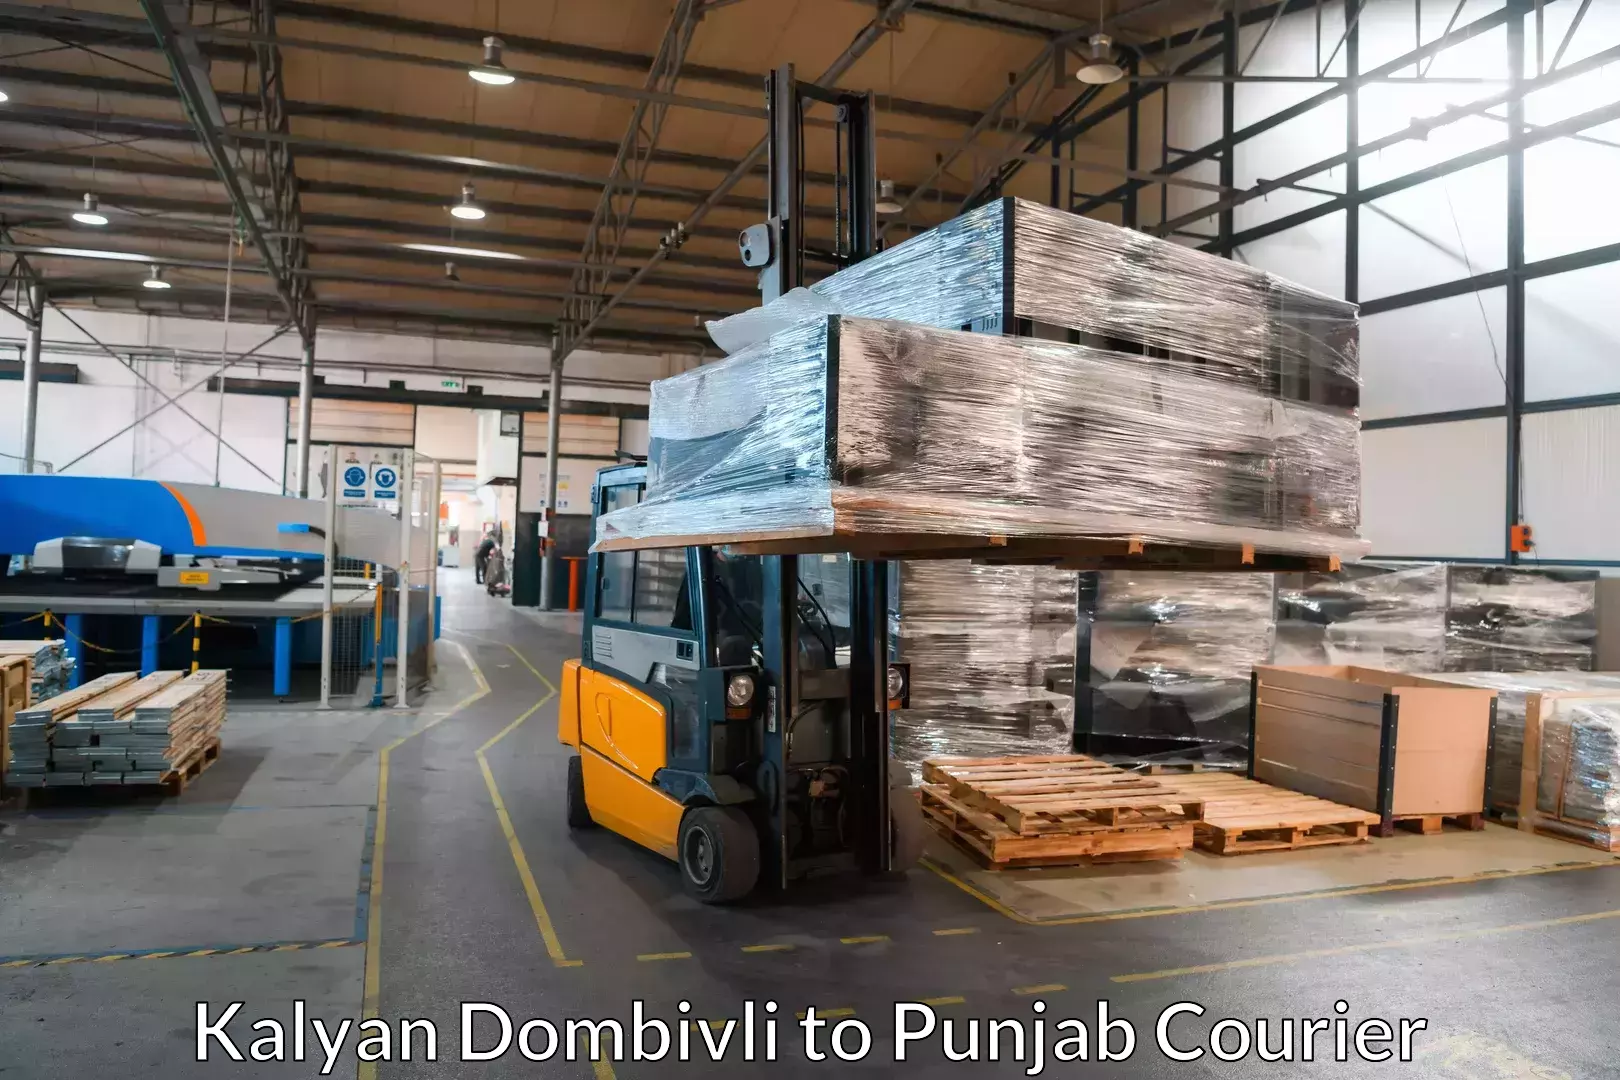 Professional relocation services in Kalyan Dombivli to Punjab